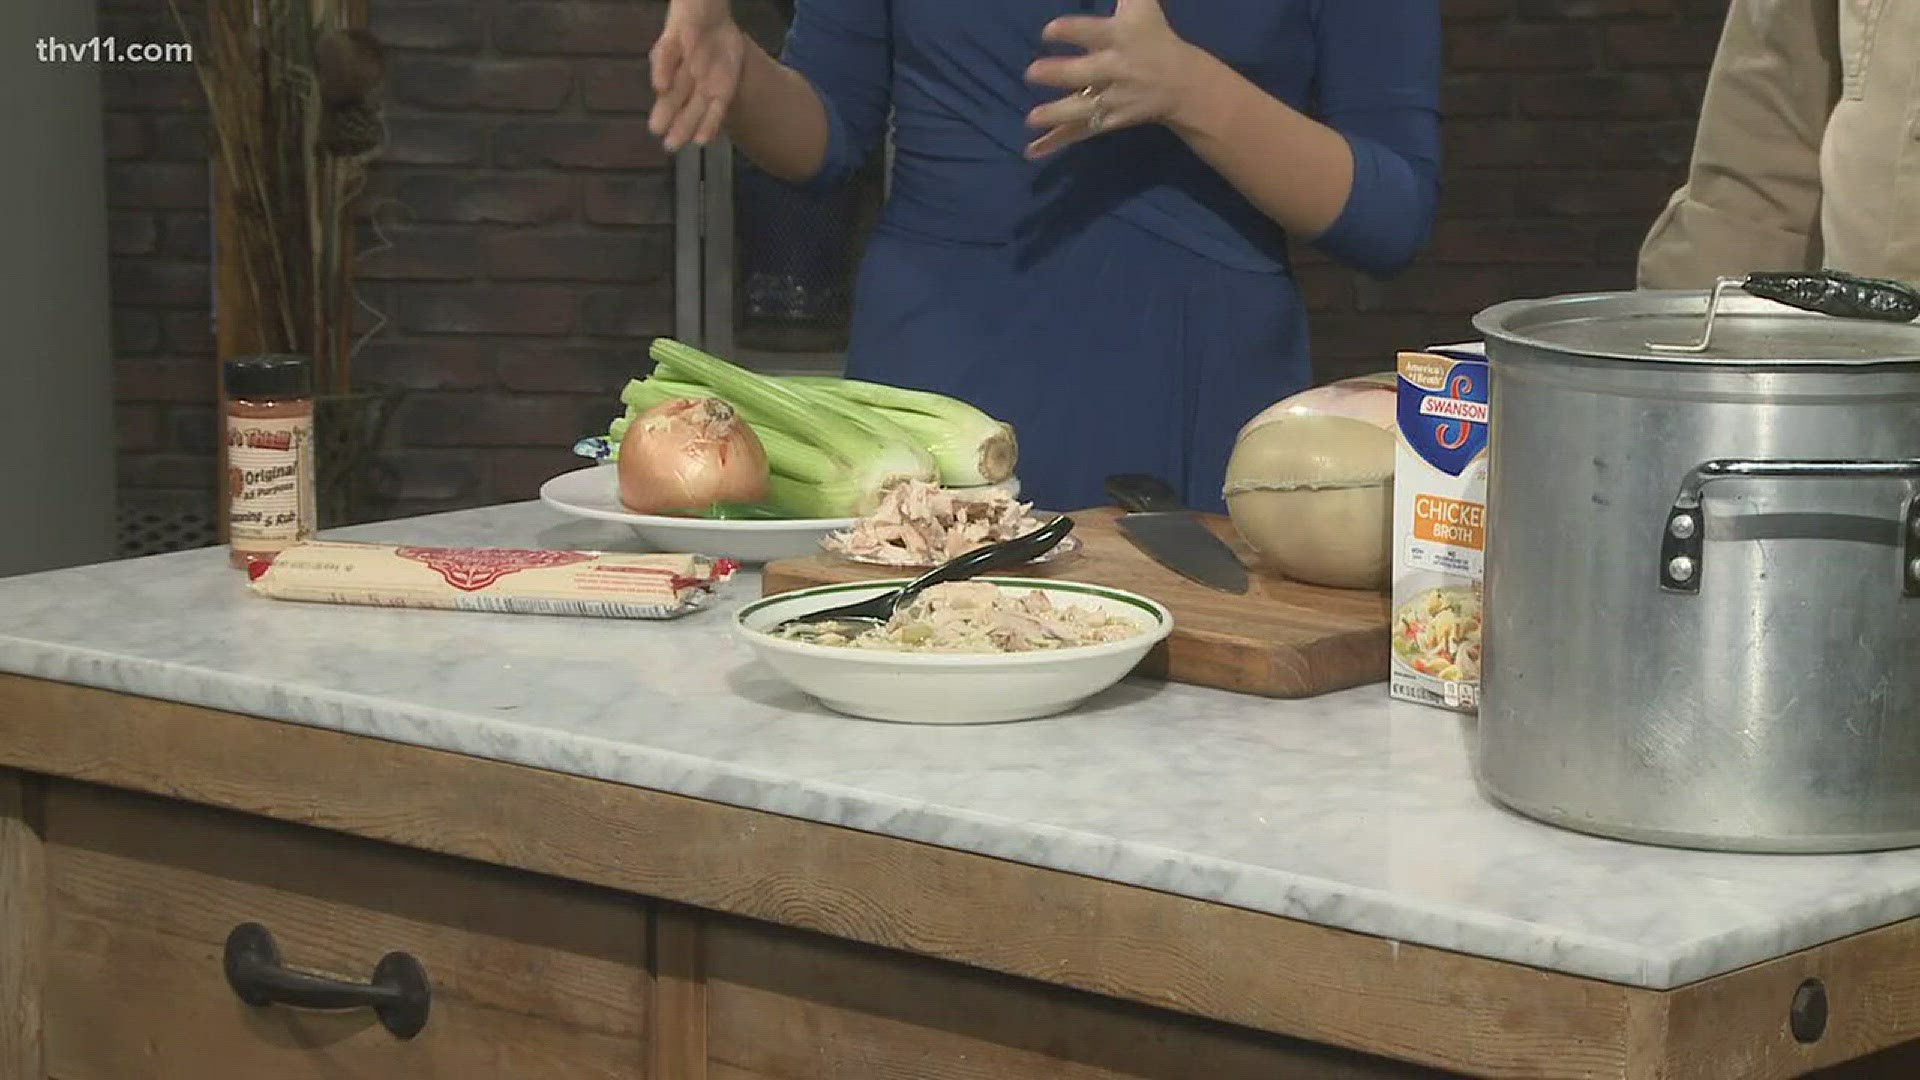 Anthony Michael from Cross-Eyed Pig joined THV11 This Morning to show us an easy recipe for chicken noodle soup